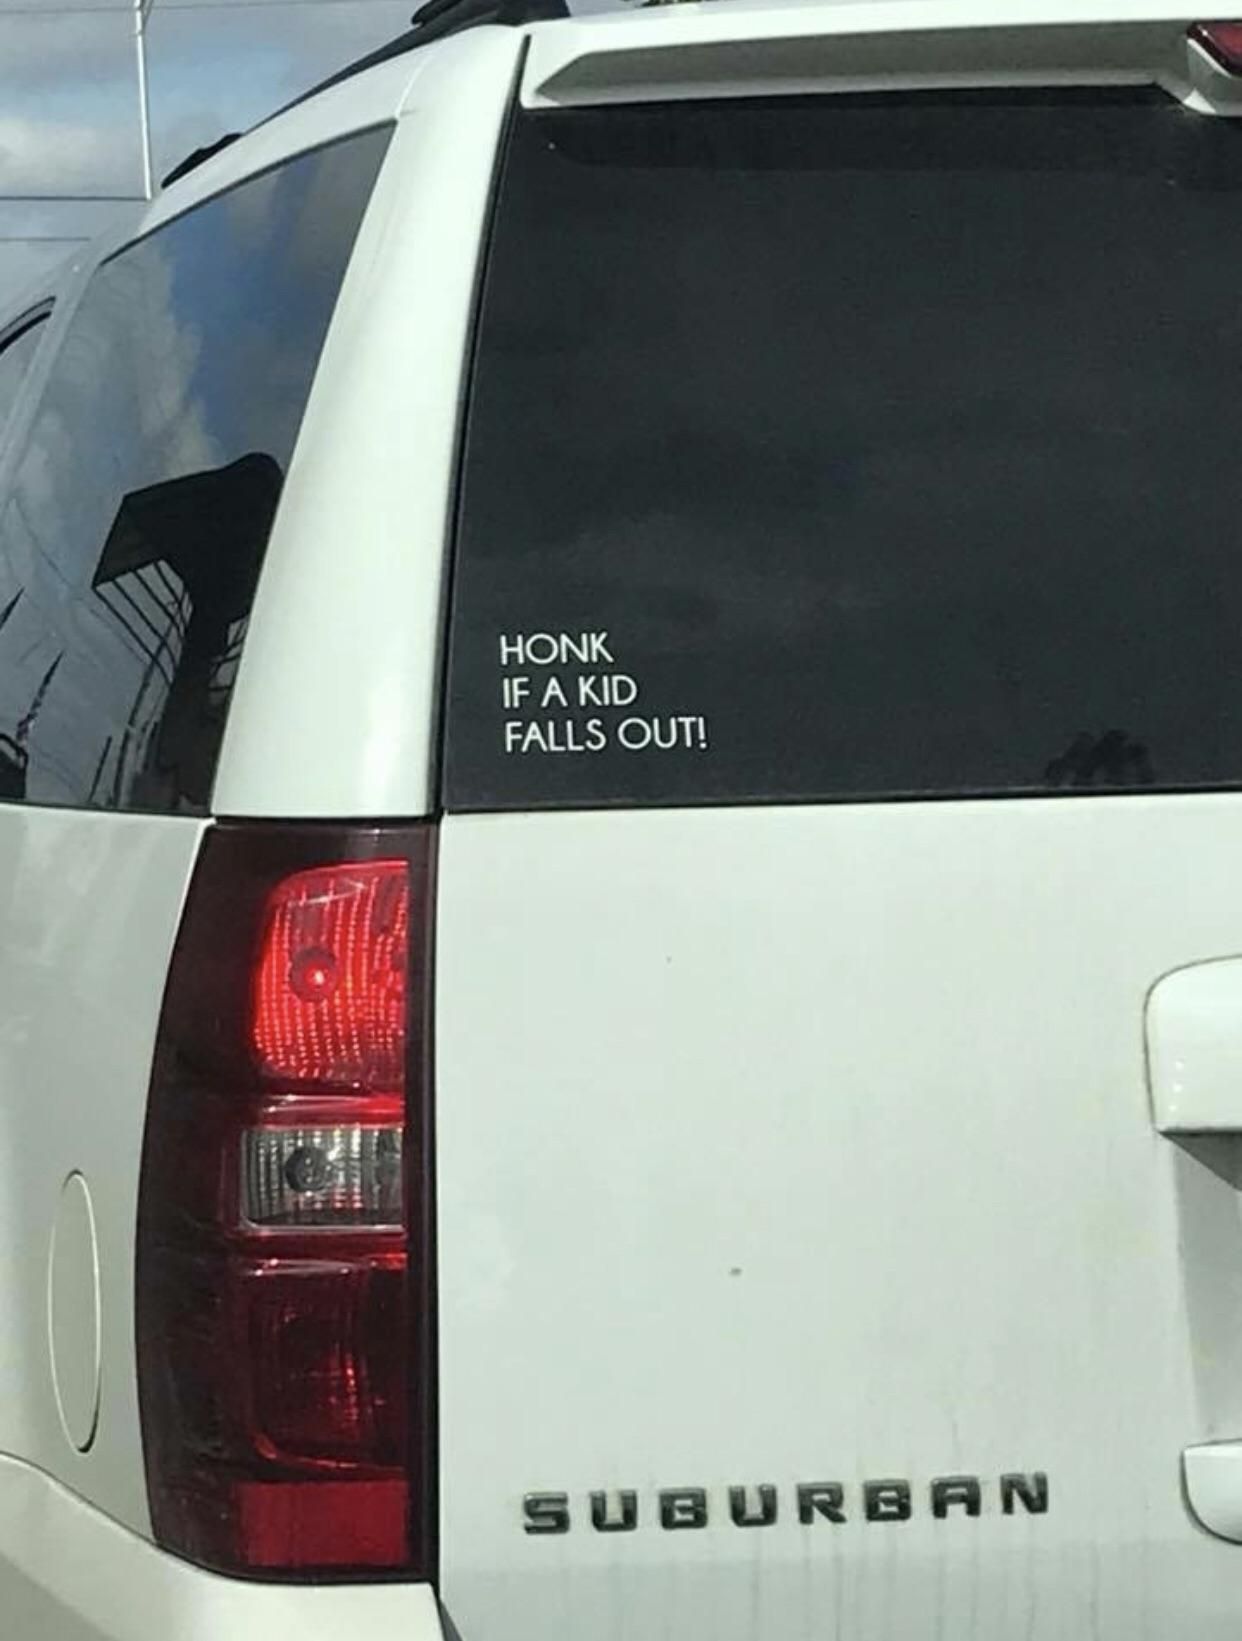 “Honk if a kid falls out!”